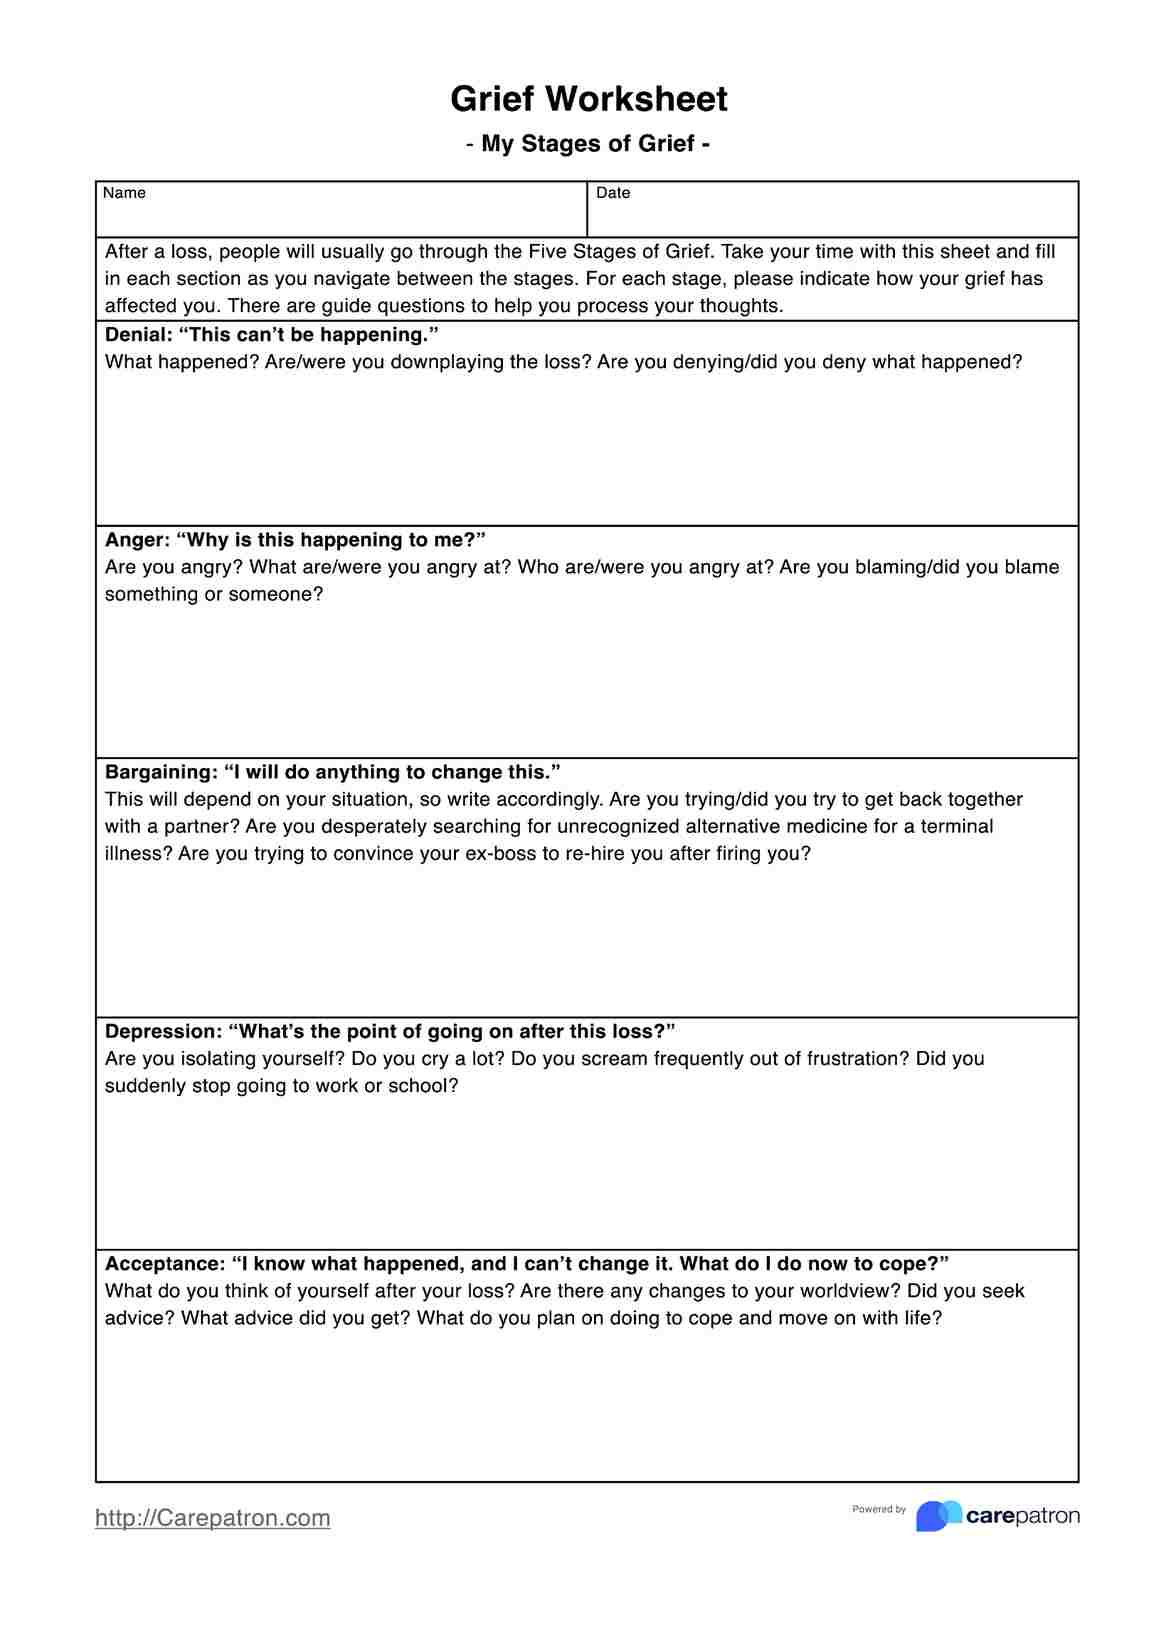 Grief Worksheets PDF Example